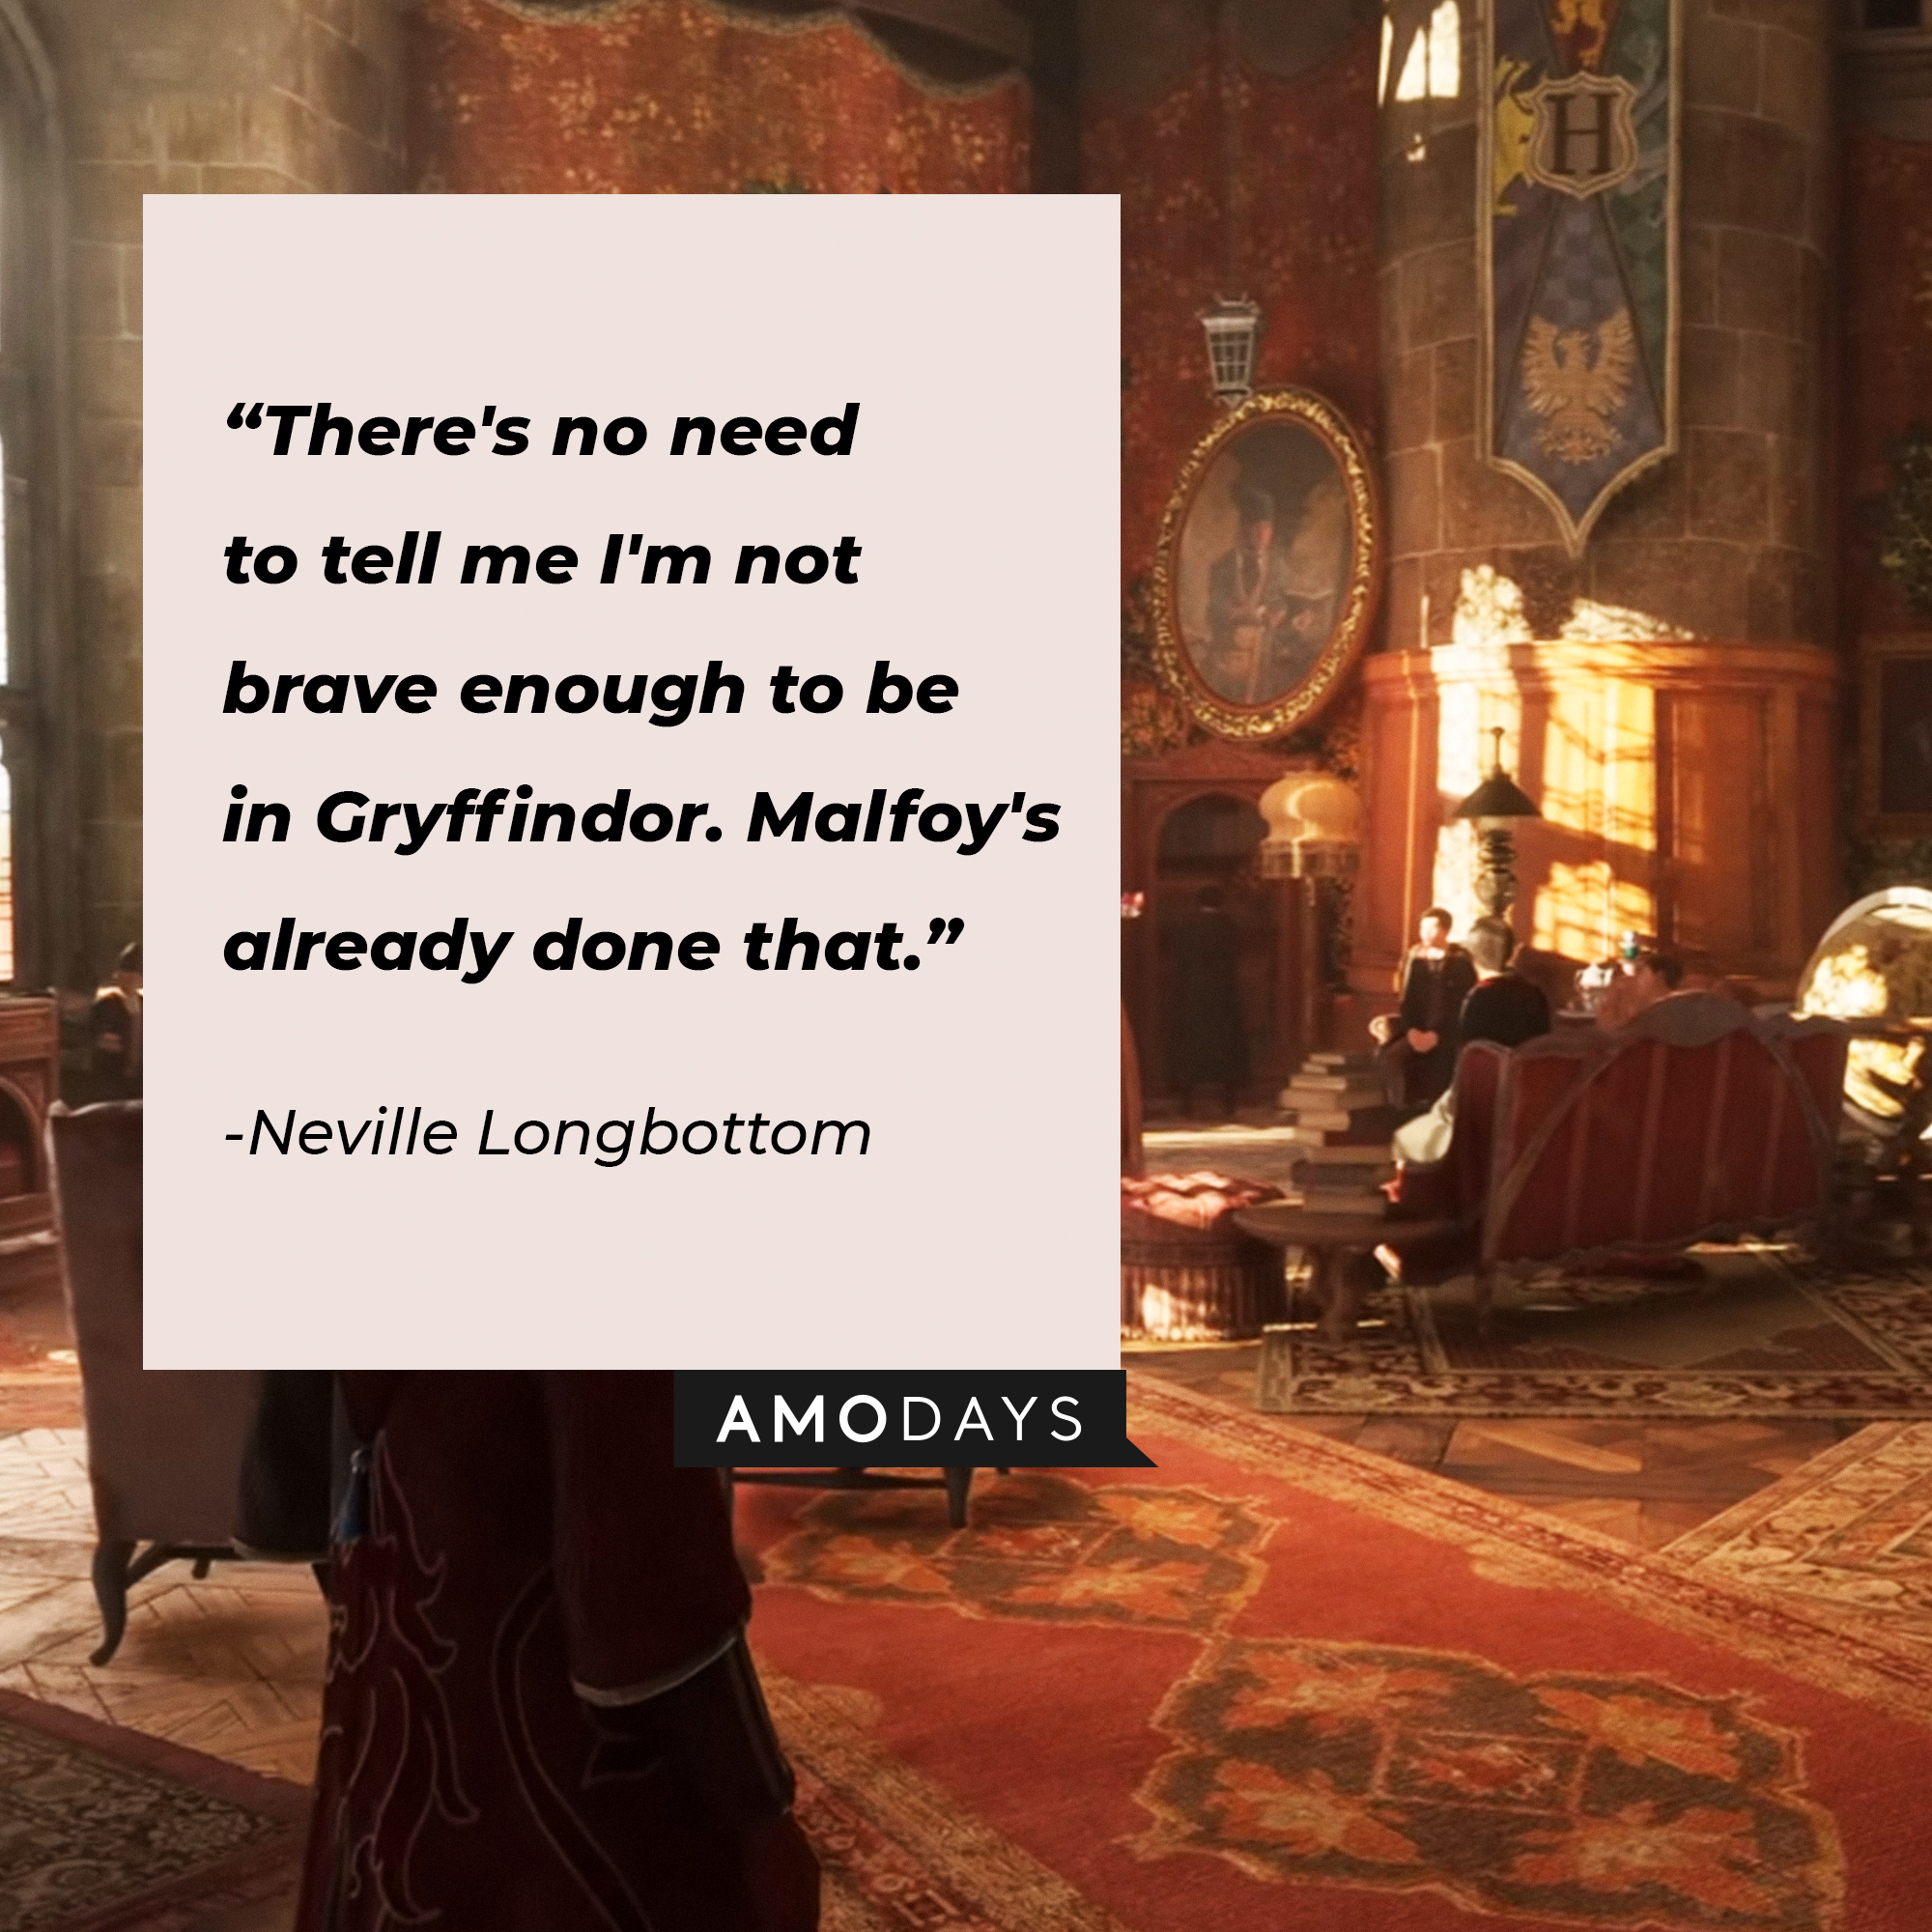 Neville Longbottom's quote: "There's no need to tell me I'm not brave enough to be in Gryffindor. Malfoy's already done that." | Source: Youtube.com/HogwartsLegacy